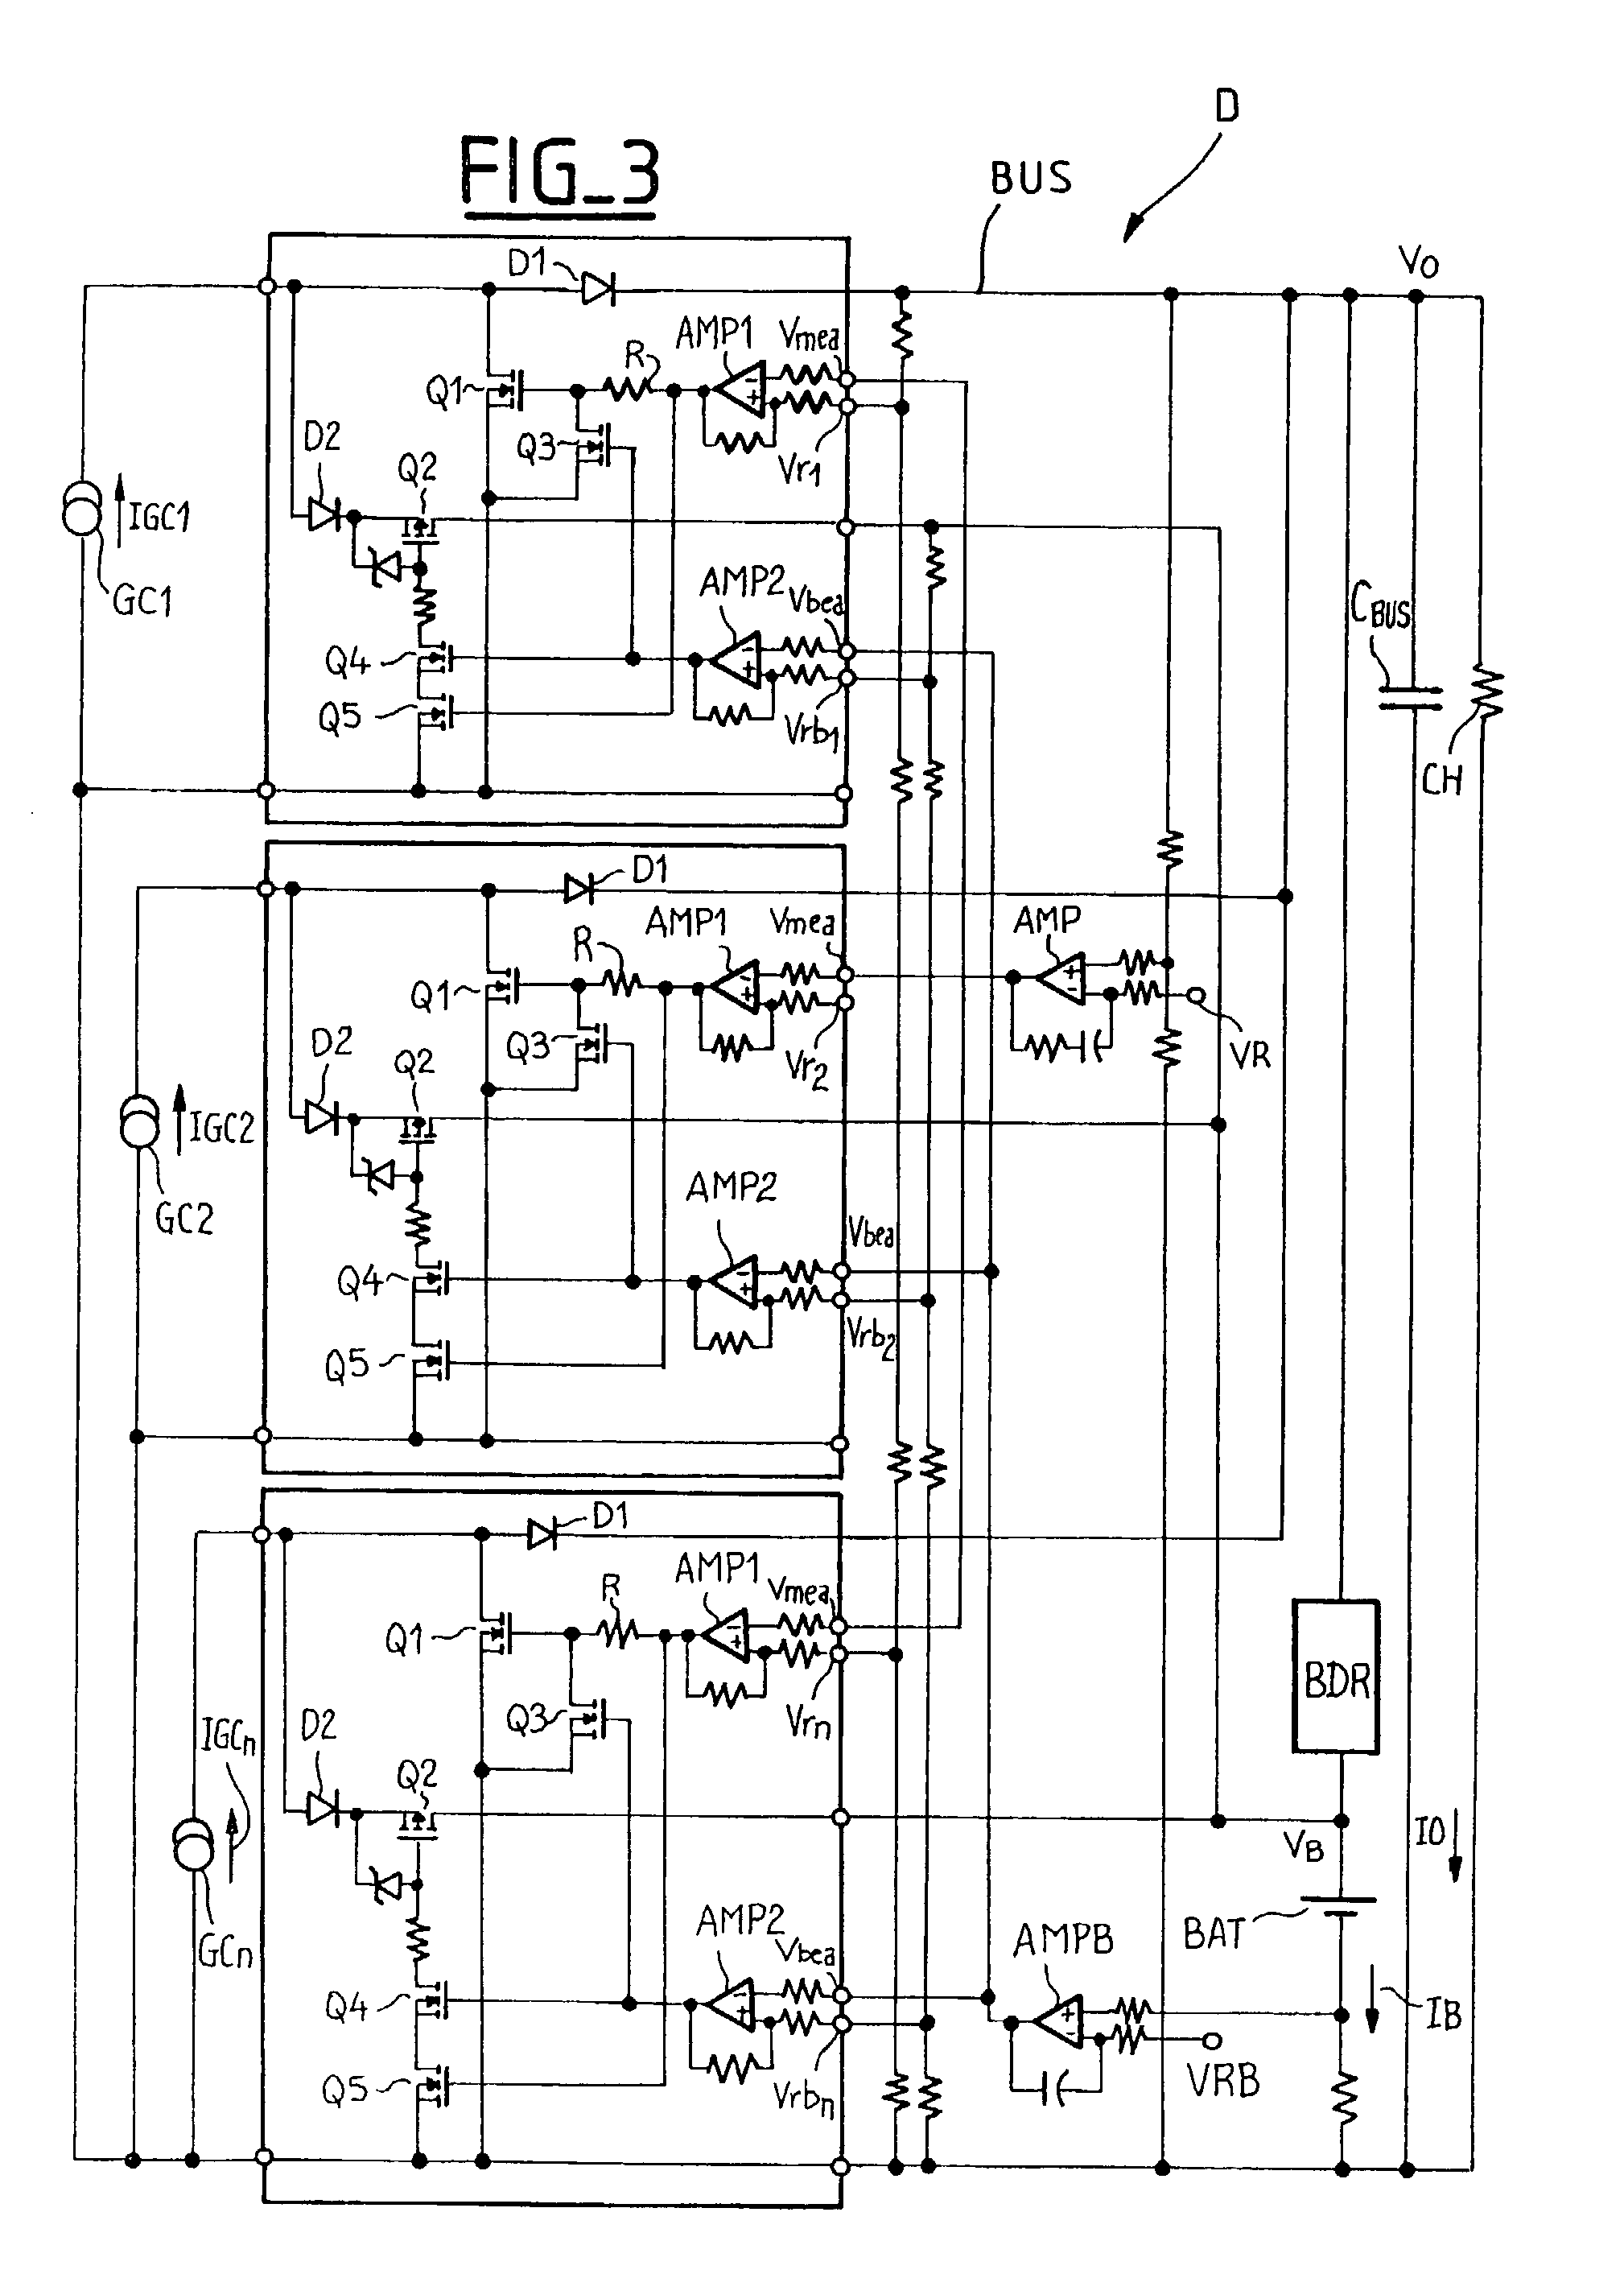 Energy regulation system for an electrical power supply bus